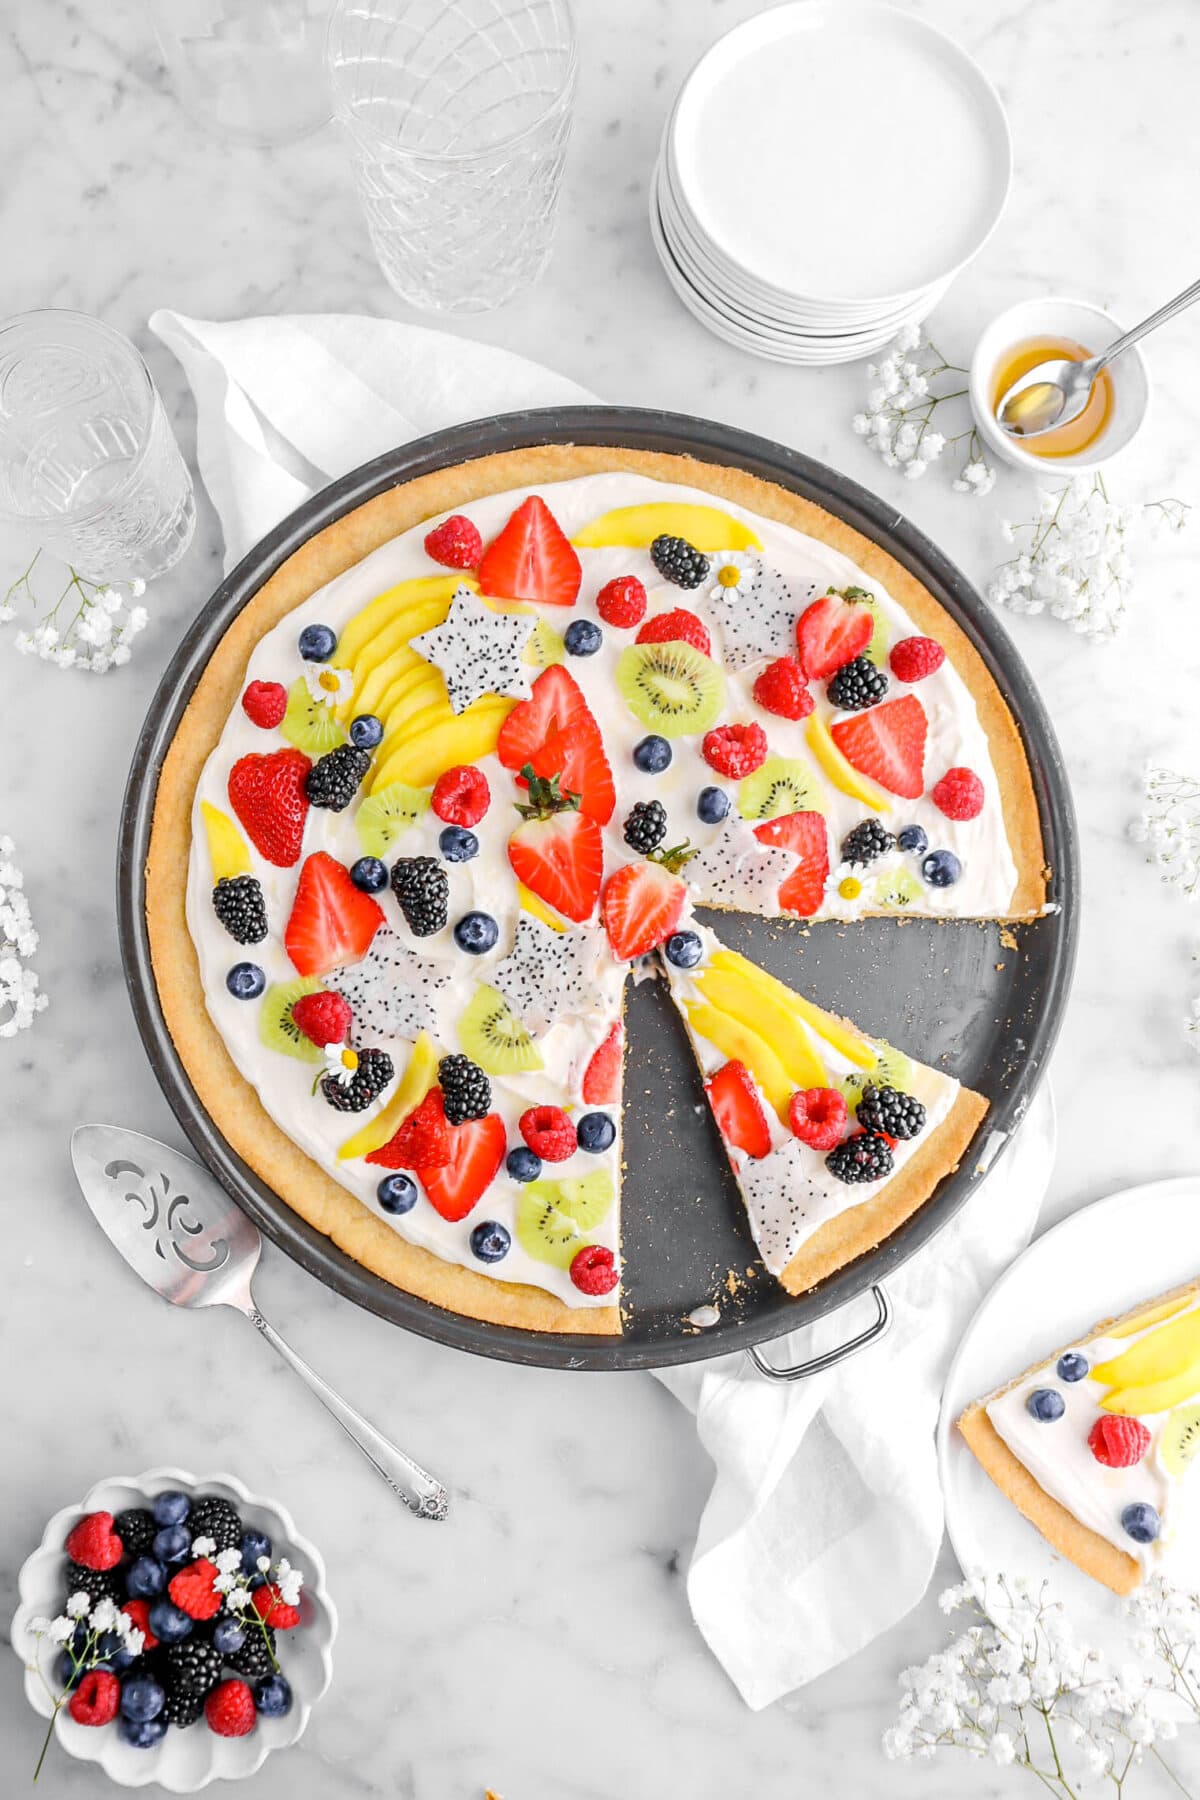 overhead shot of fruit pizza with slice cut into it with a white plate beside with another piece of pizza on it, with white flowers around on marble surface, a bowl of honey, stack of white plates, three empty glasses, a cake knife, and a bowl of berries.